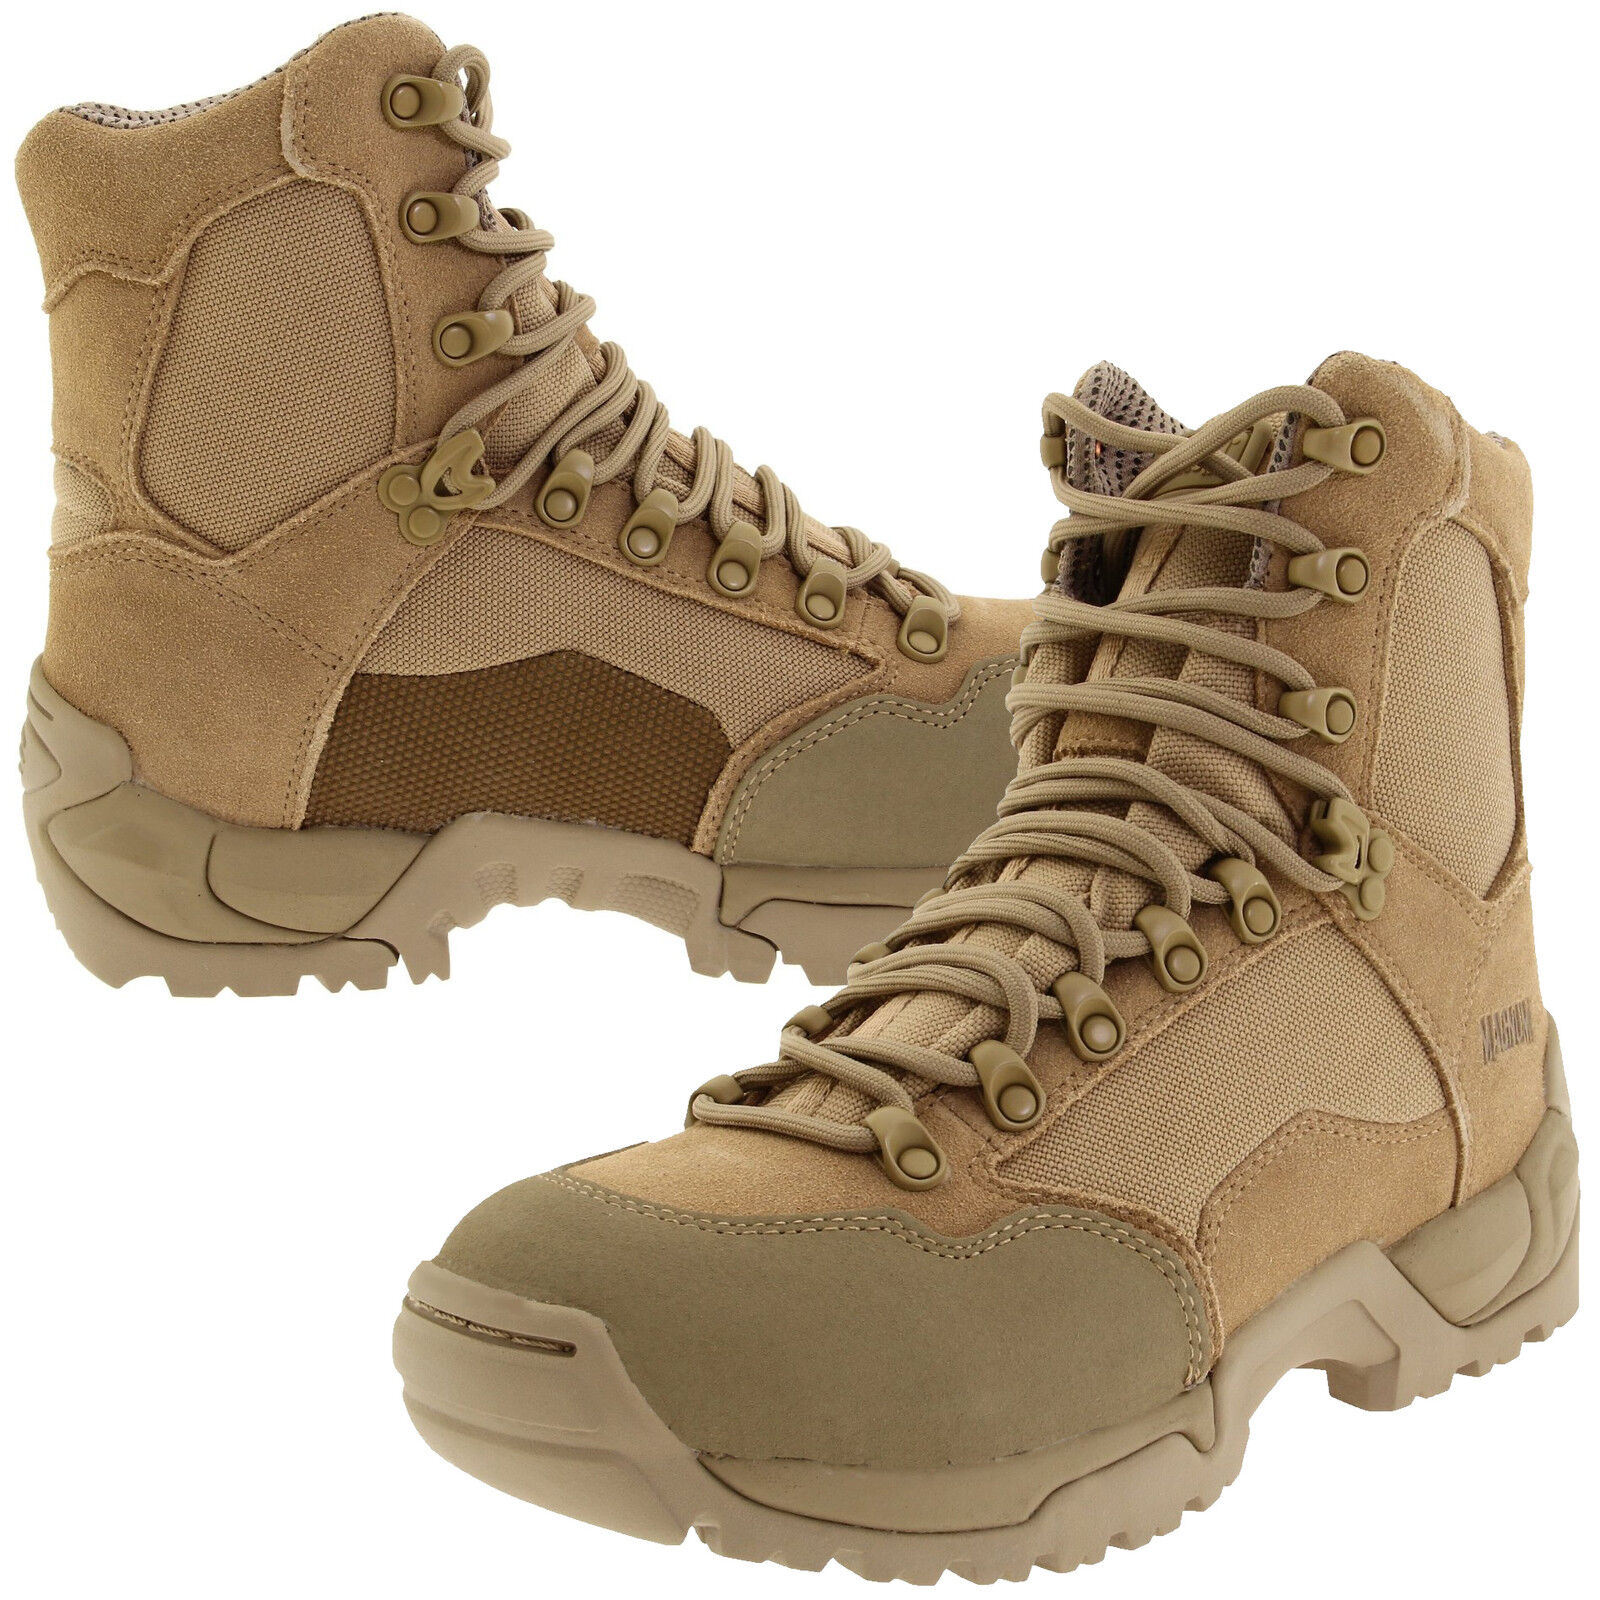 Magnum Sidewinder HPI Tactical Police & Military Boots - Desert Tan - All Sizes